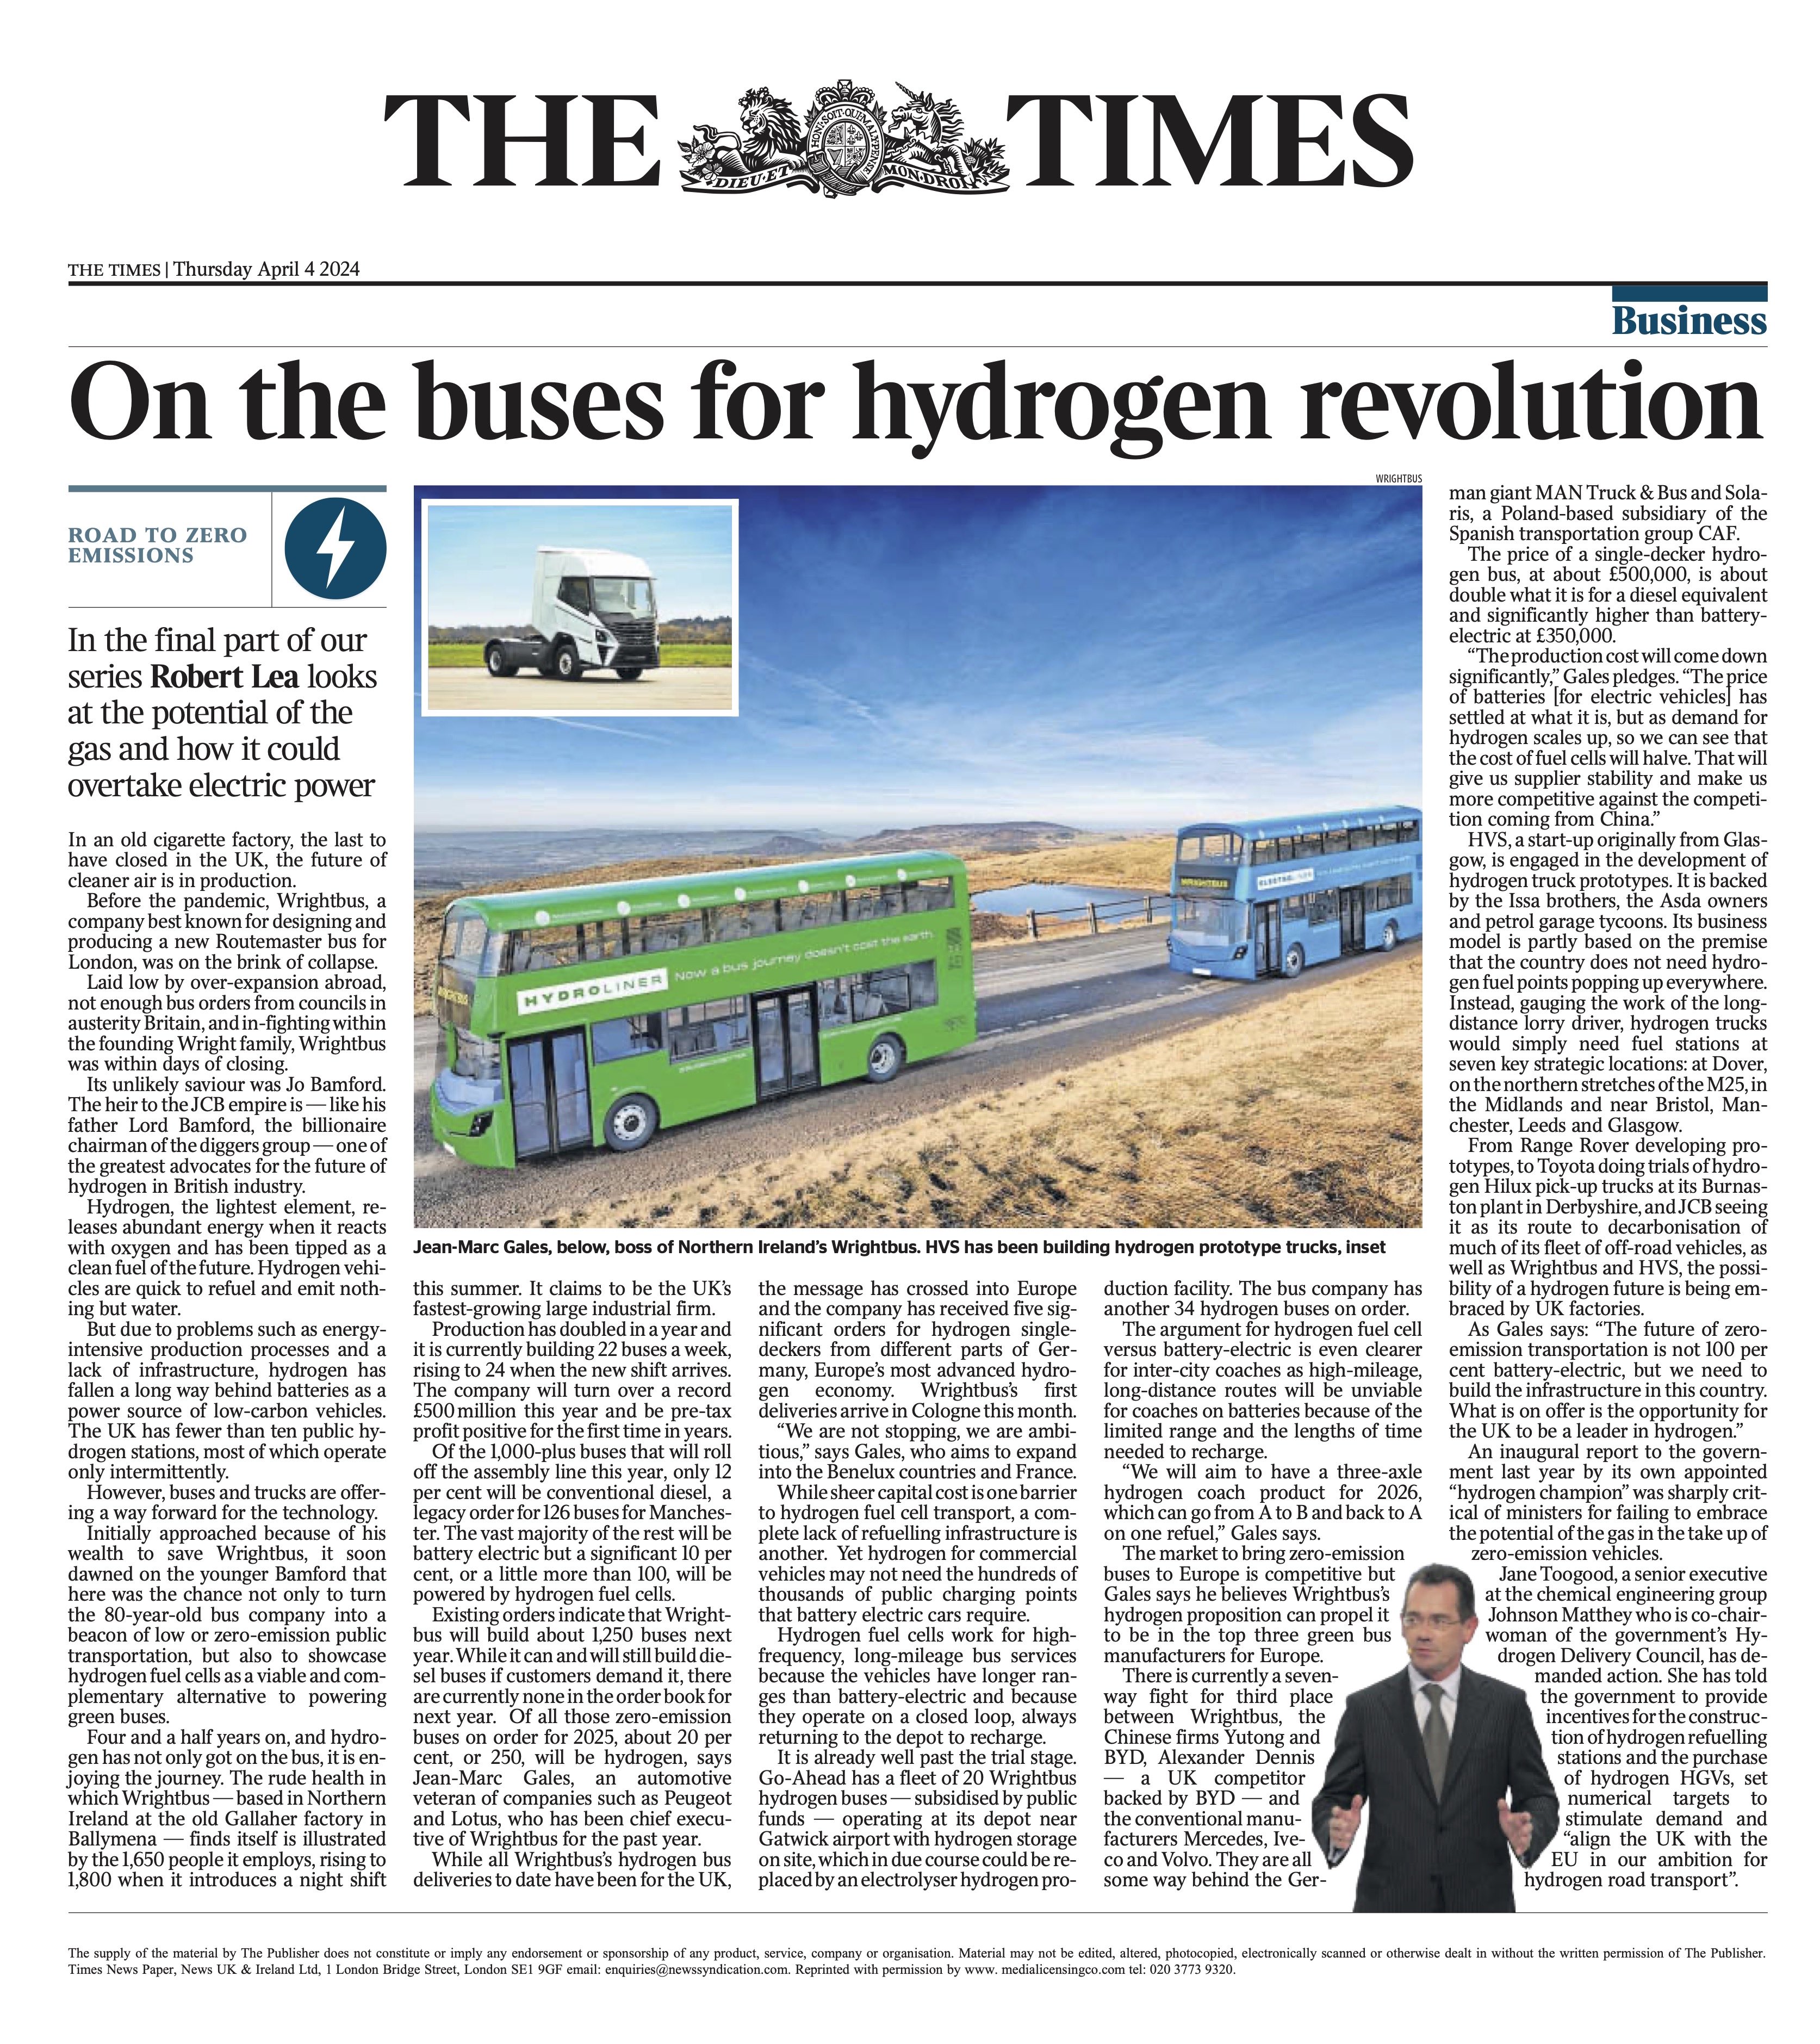 Image of an article from The Times newspaper, titled 'On the buses for hydrogen revolution'. this article was first published in The Times on 4th April 2024. It included an interview with Jean-Marc Gales, Wrightbus CEO, discussing company growth and expansion into Europe and the Wrightbus fleet of single and double deck hydrogen fuel cell buses.